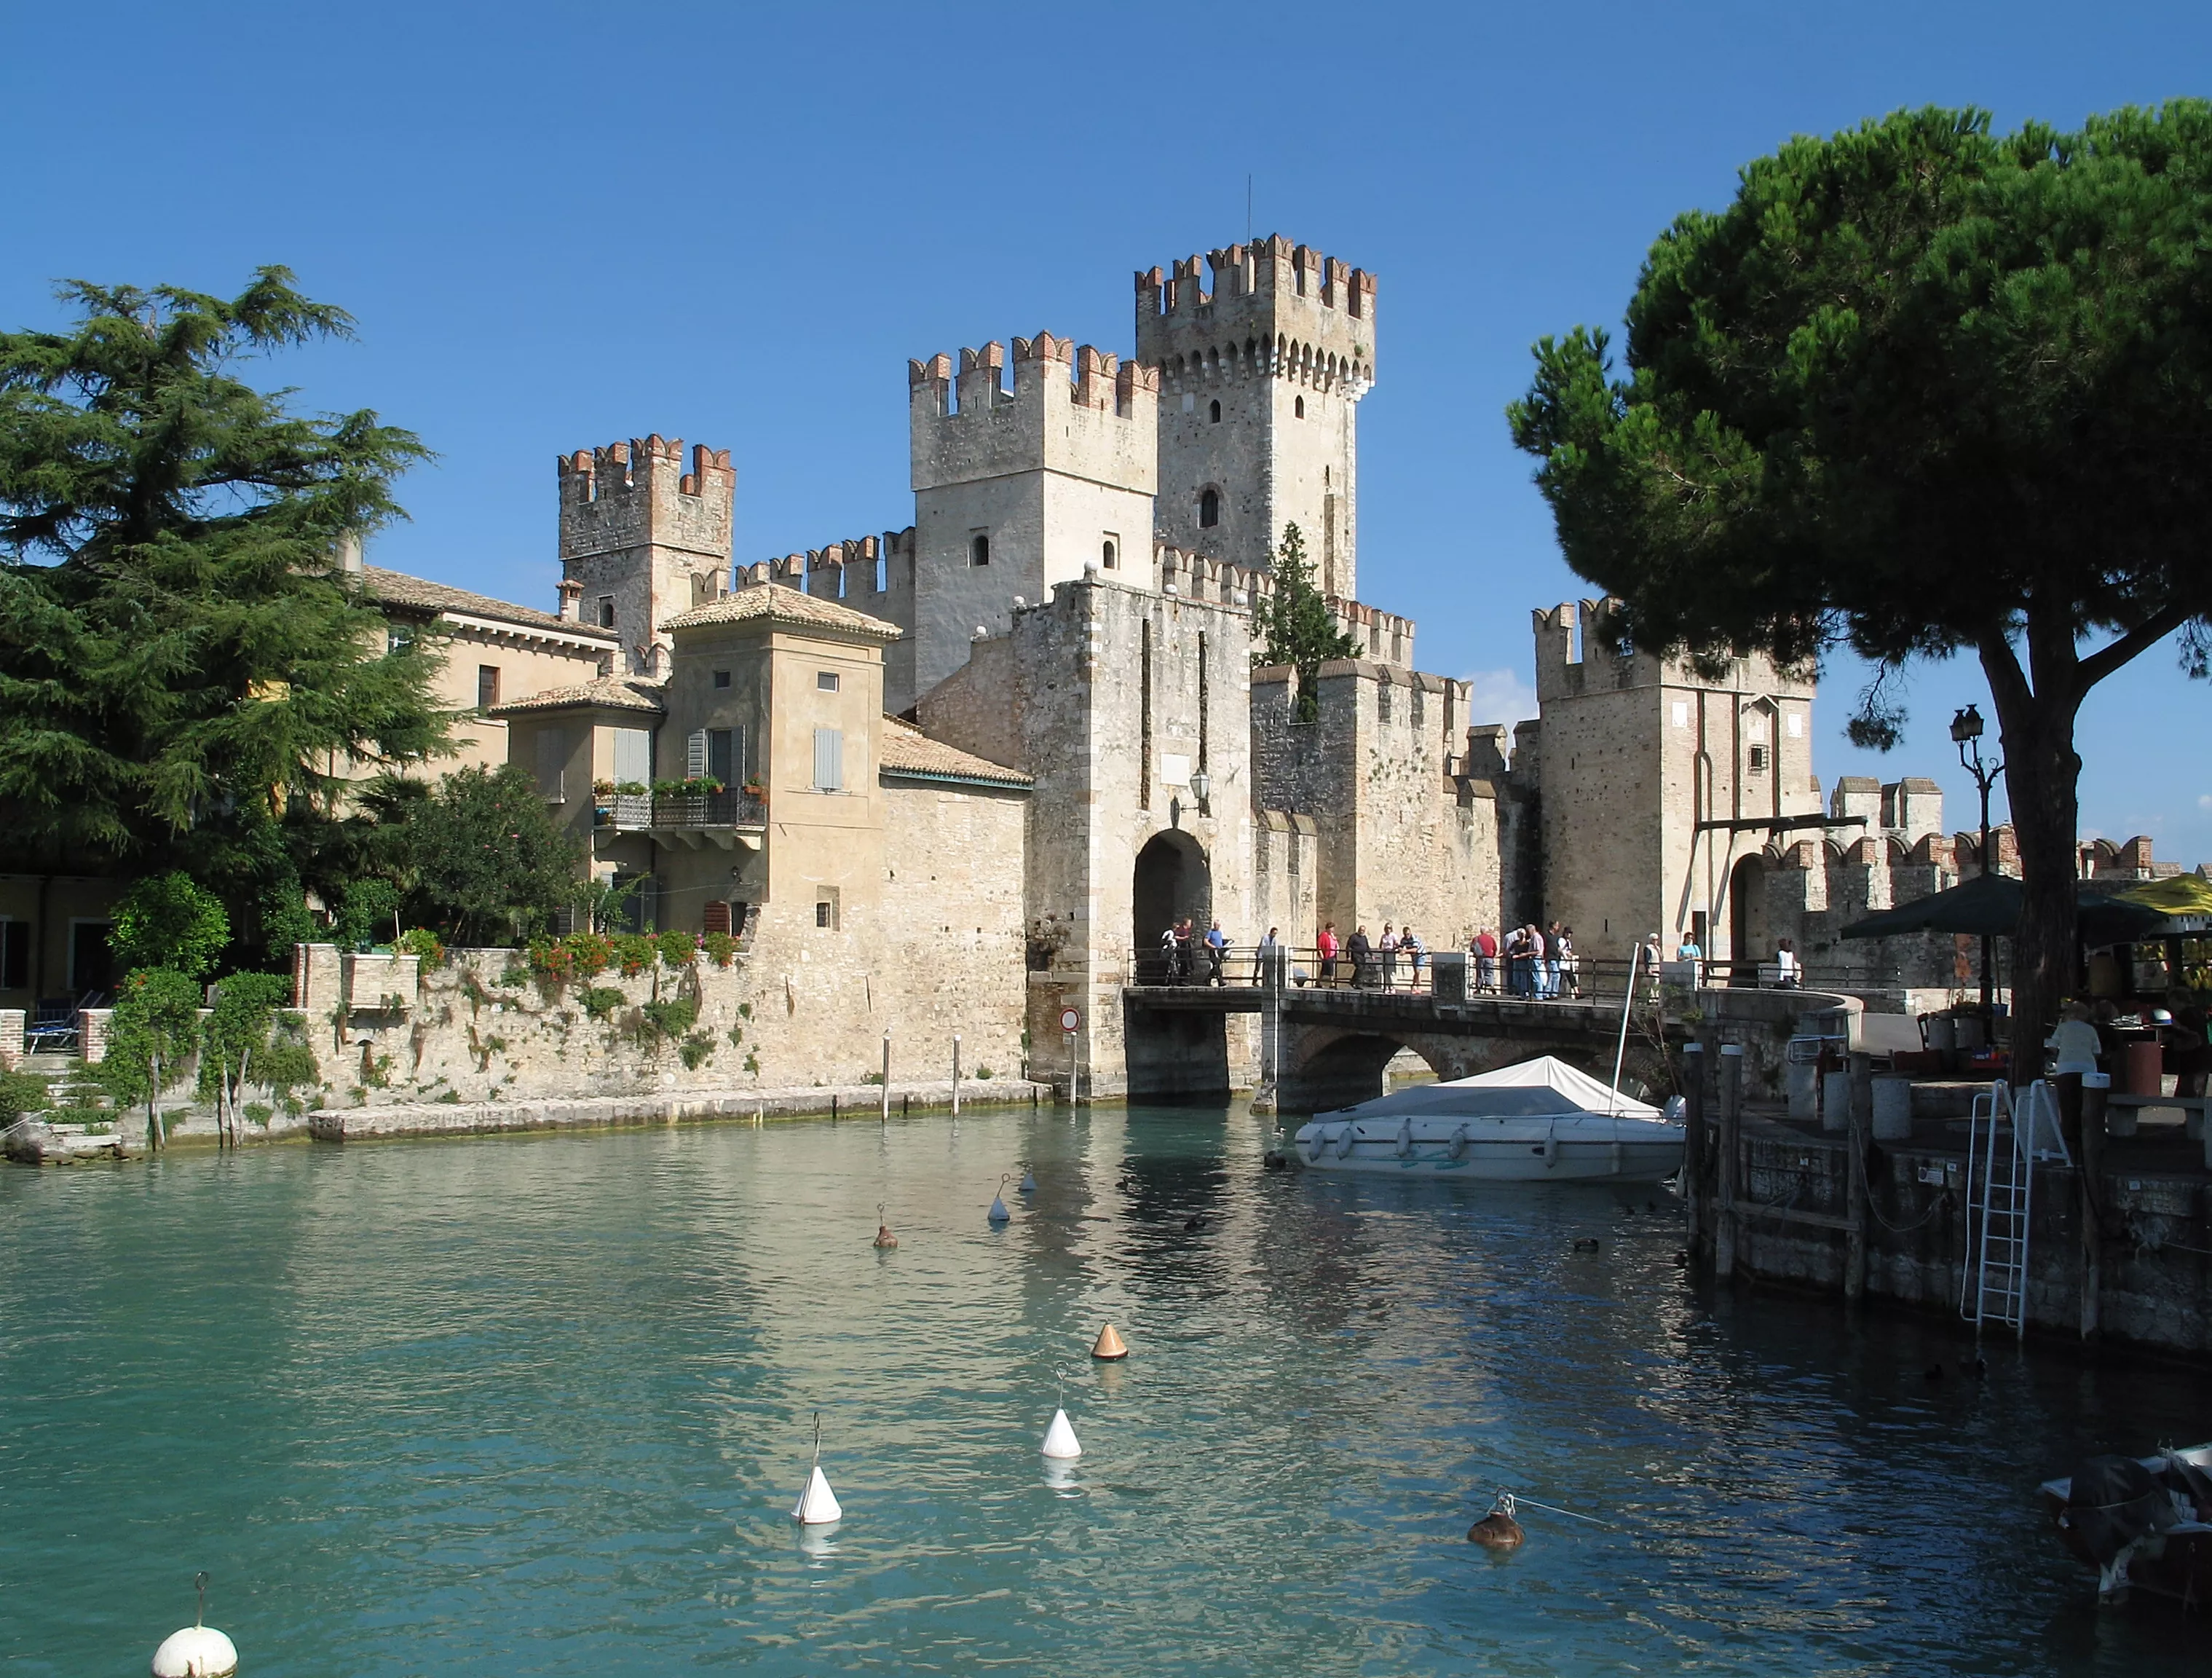 Sirmione Castle in Italy, Europe | Castles - Rated 5